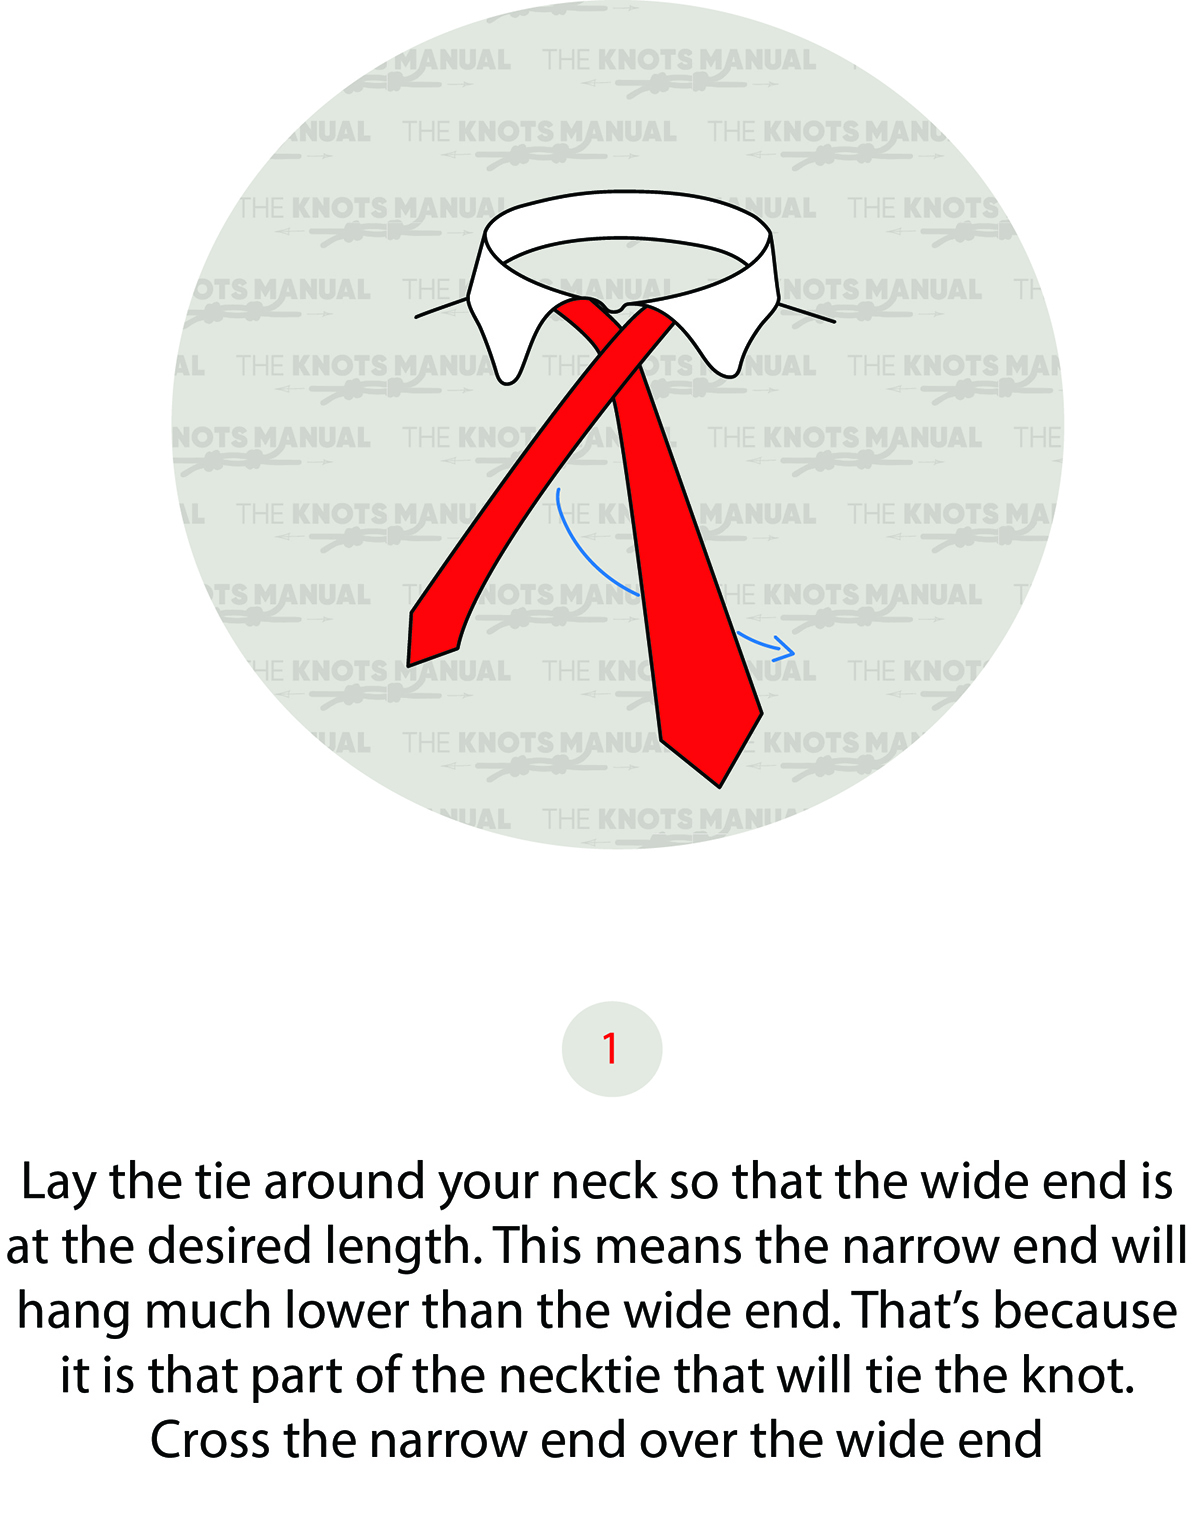 How to Tie the Eldredge Tie Knot (Quick Guide)